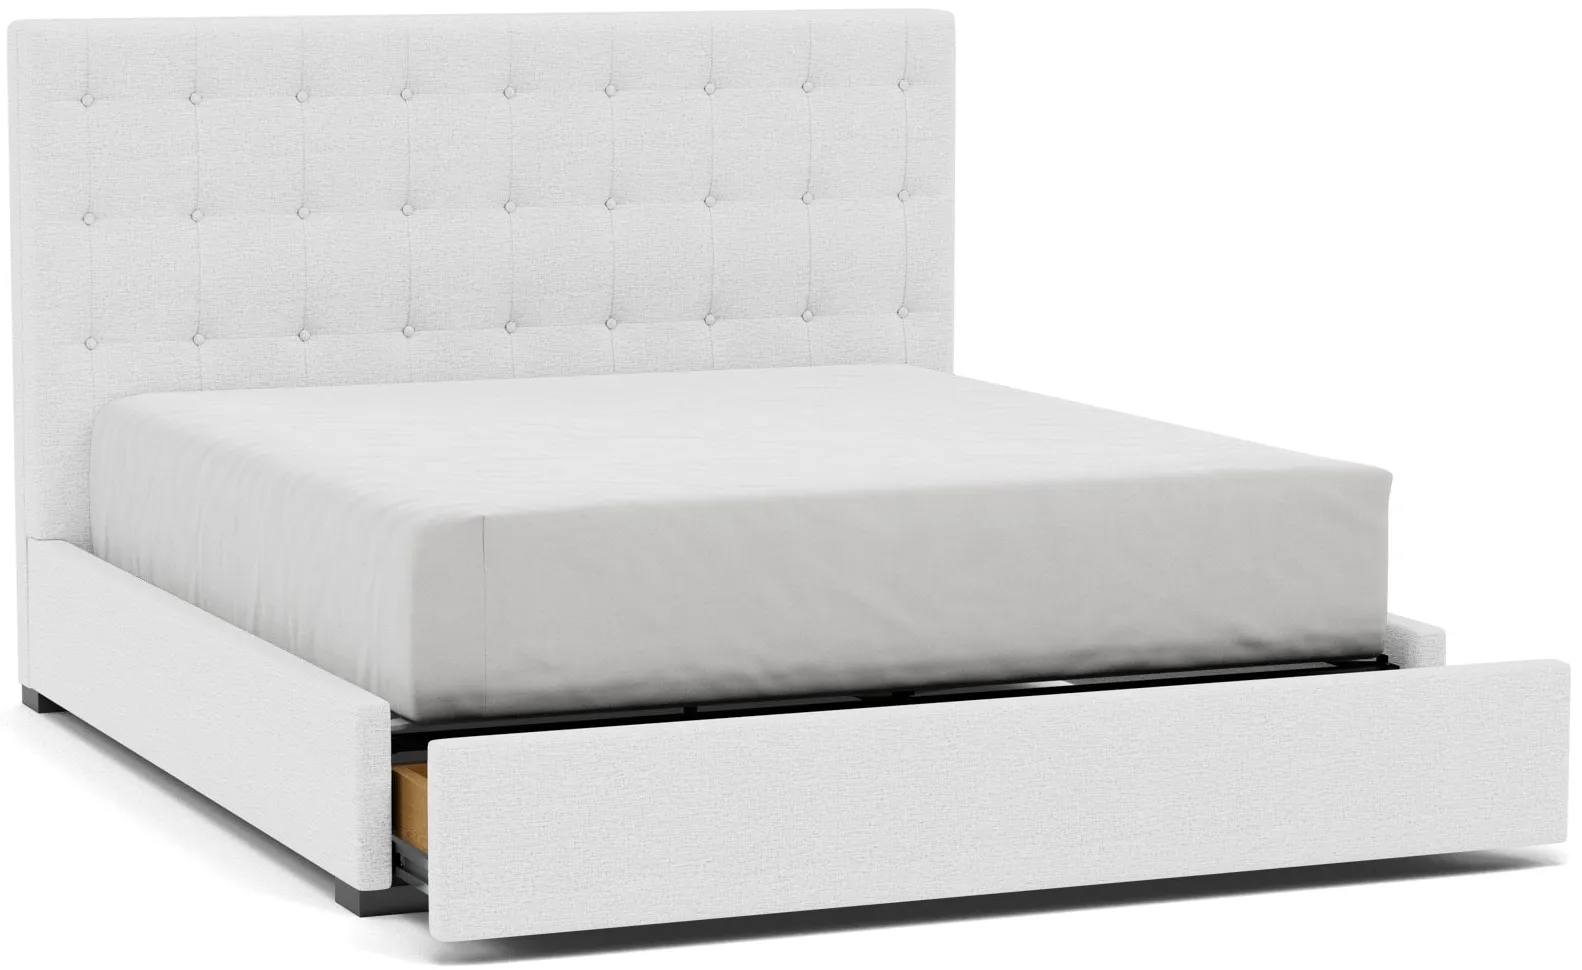 Abby King Upholstered Storage Bed in Tech Pebble